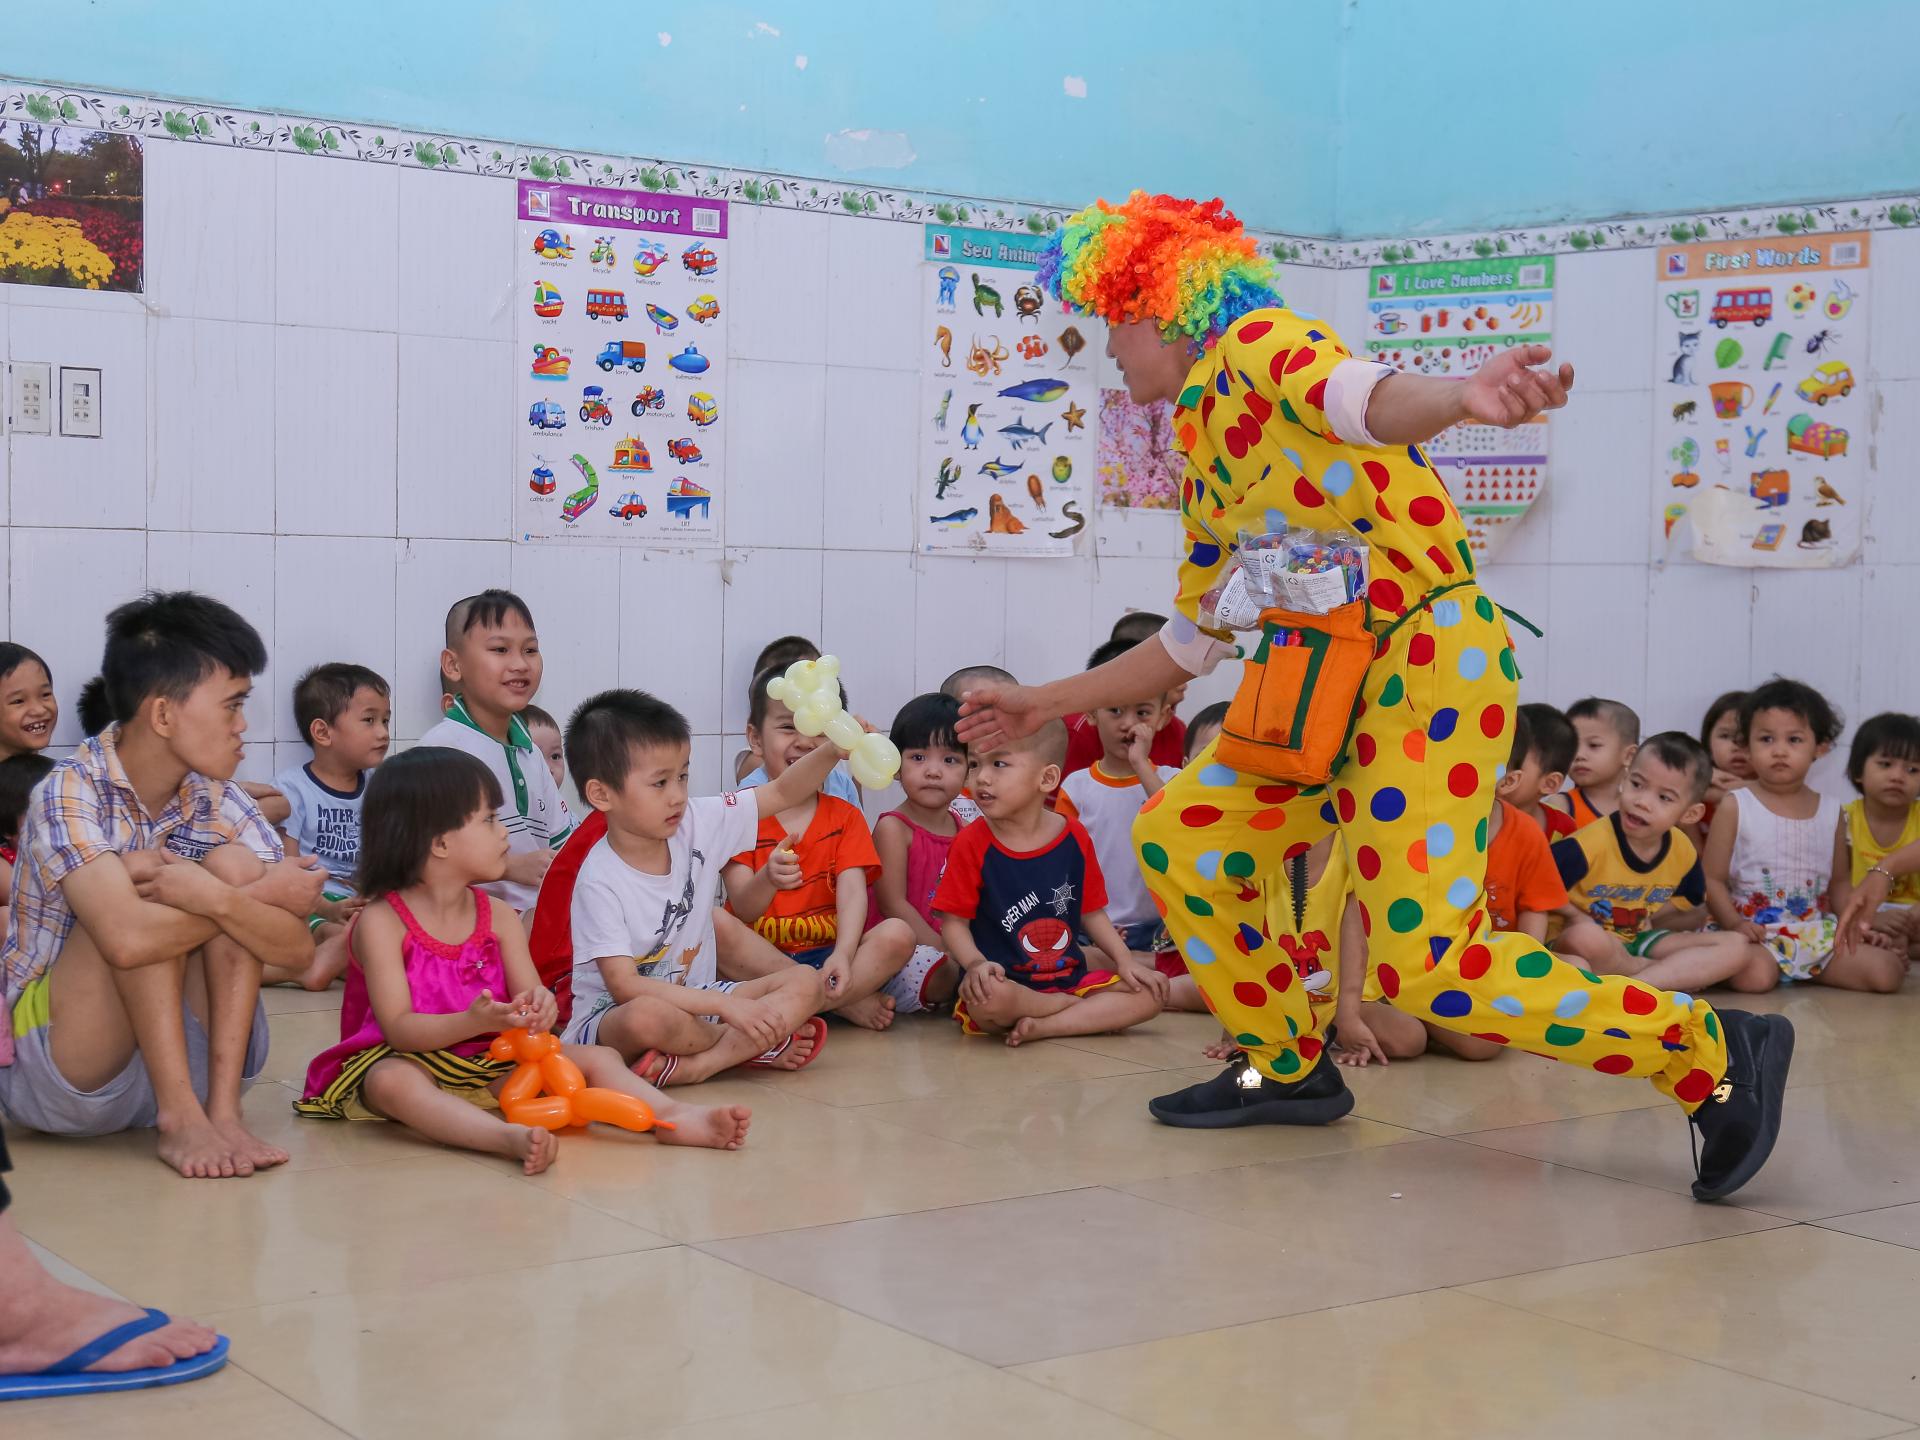 a clown is dancing in front of a group of children